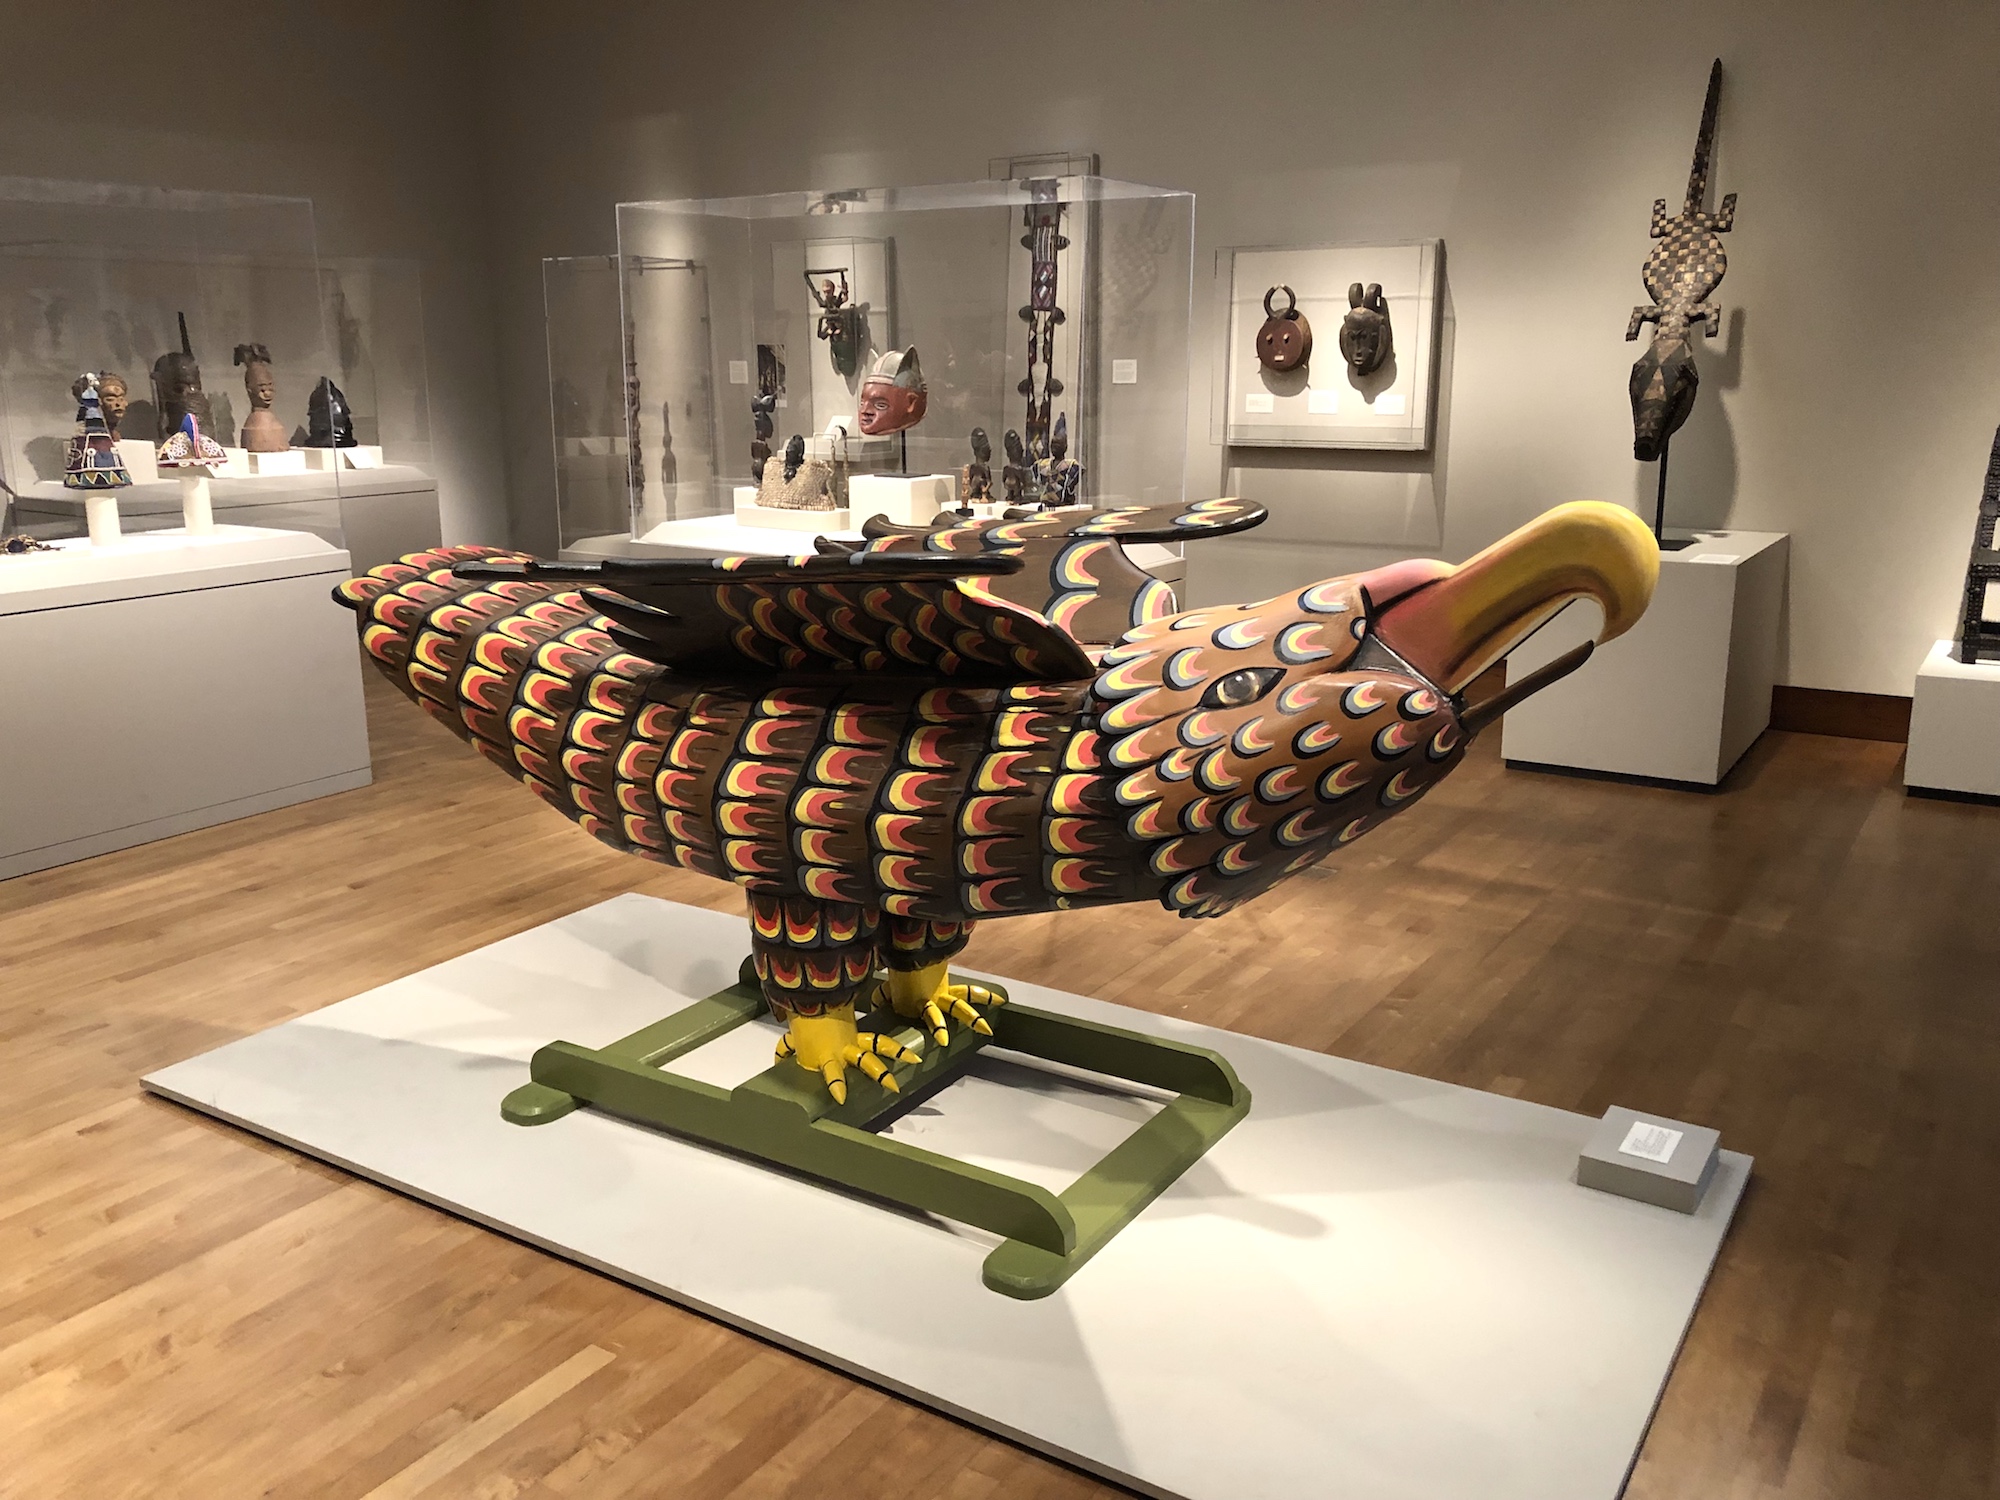 Design Coffin by Eric Adjety Anang at the Chazen Museum of Art in Madison Wisconsin.